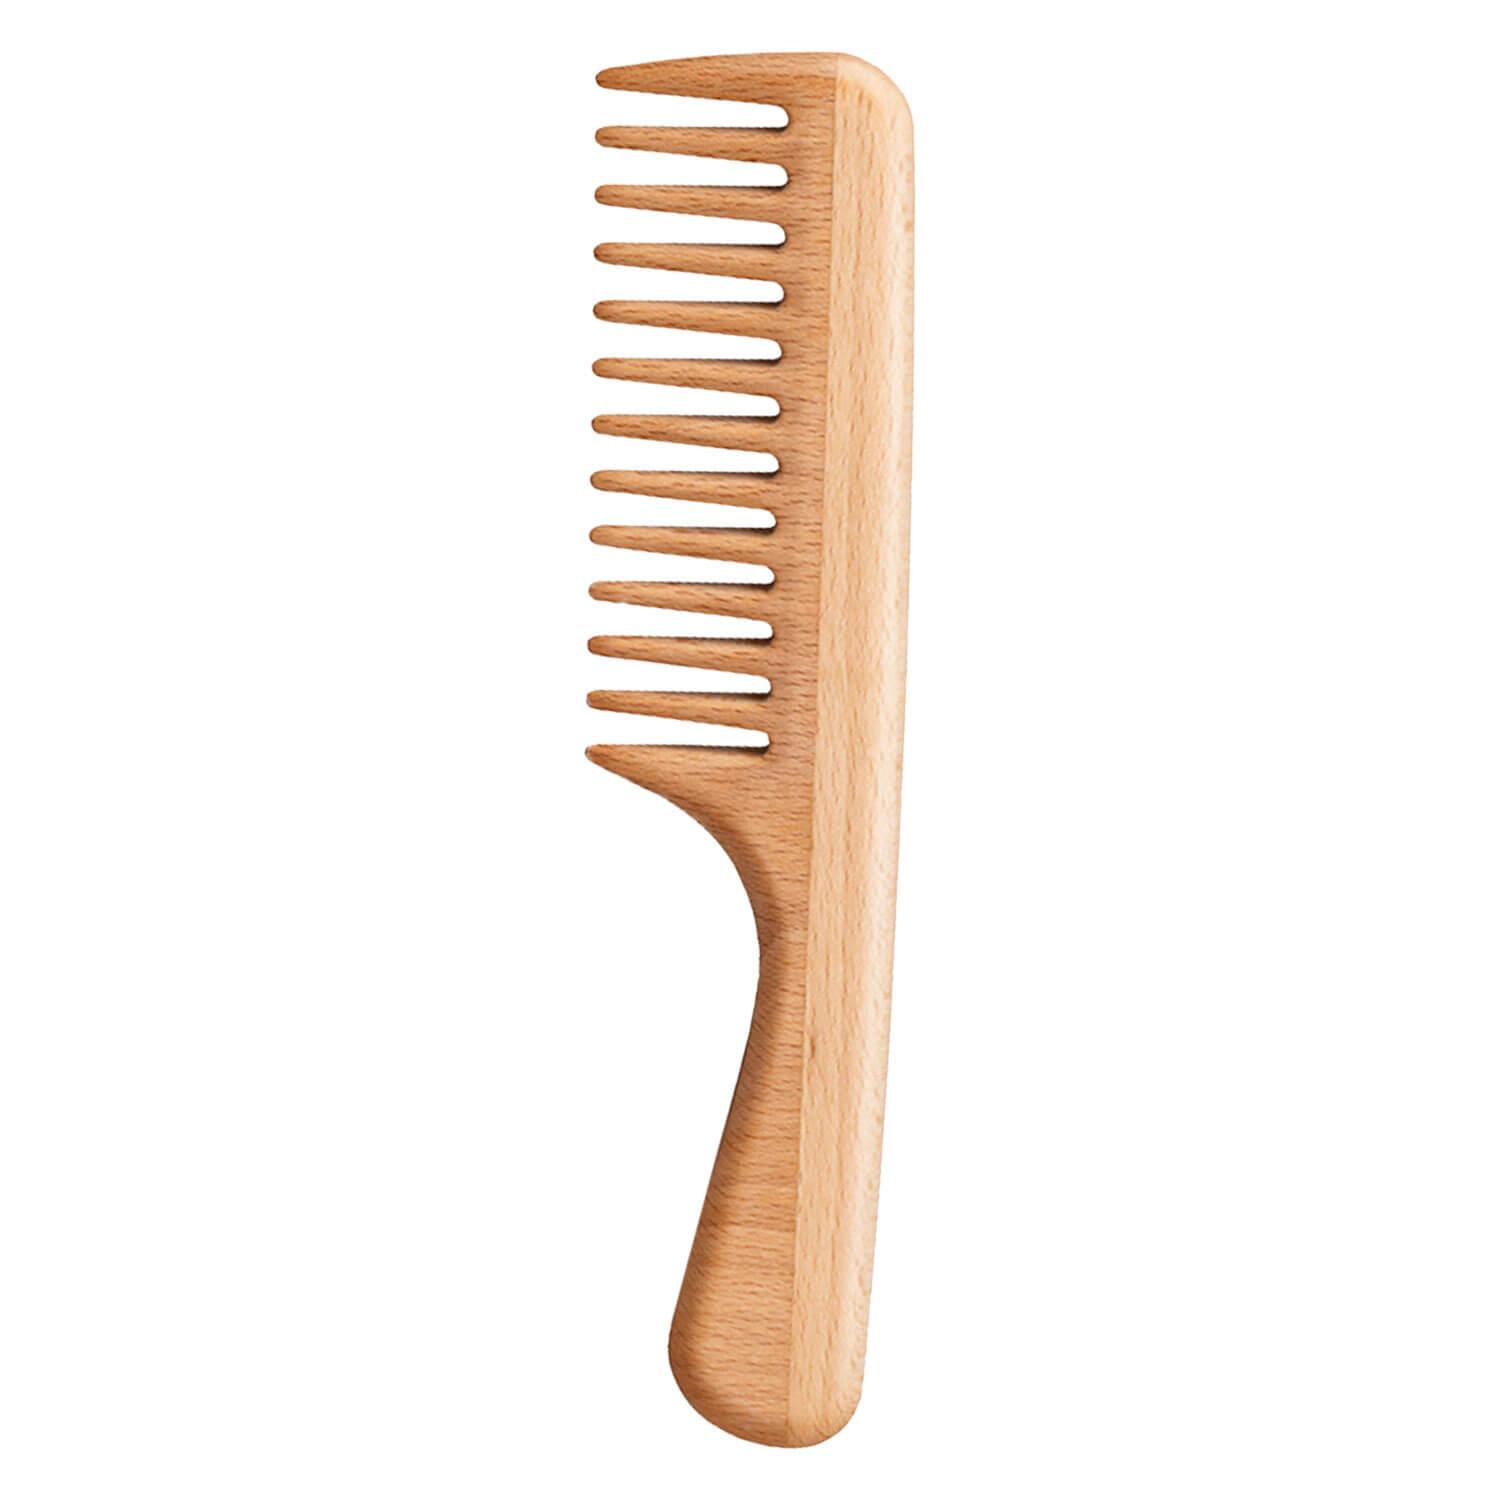 Trisa Hair Care - Natural Brilliance Antistatic & Styling Styling Comb